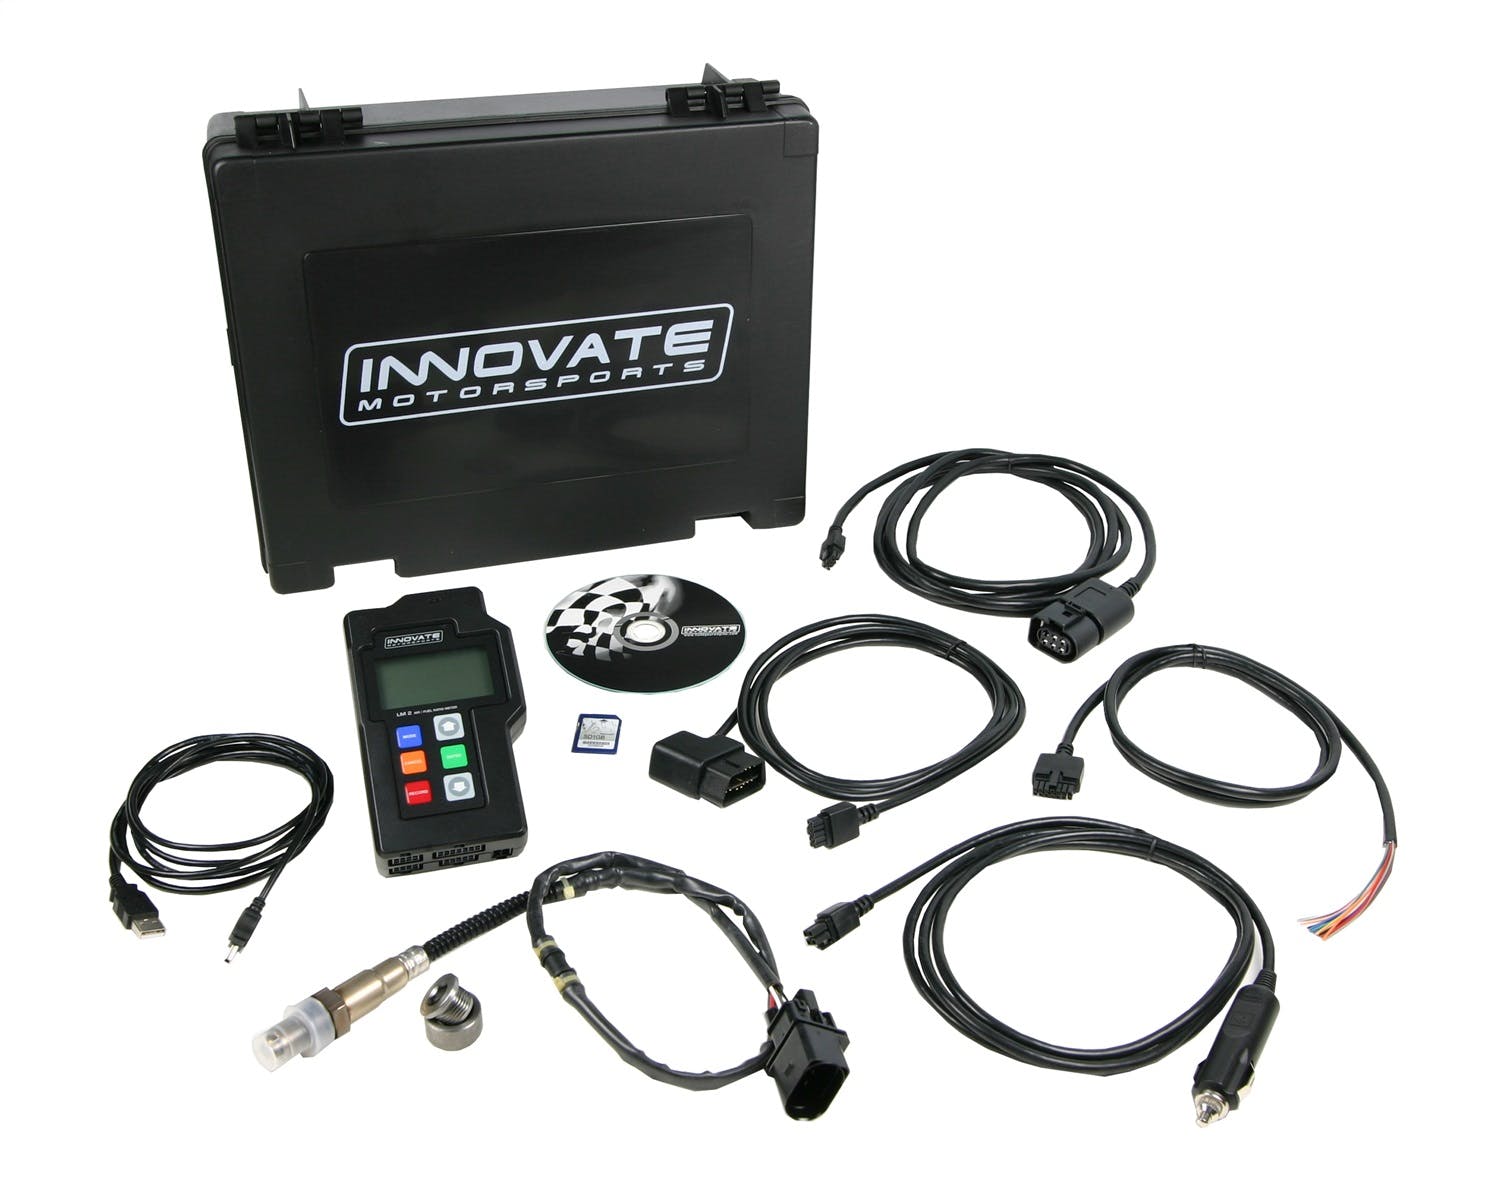 Innovate Motorsports 3806 LM-2 Air/Fuel Ratio Meter, Single O2 Complete Kit w/carrying case